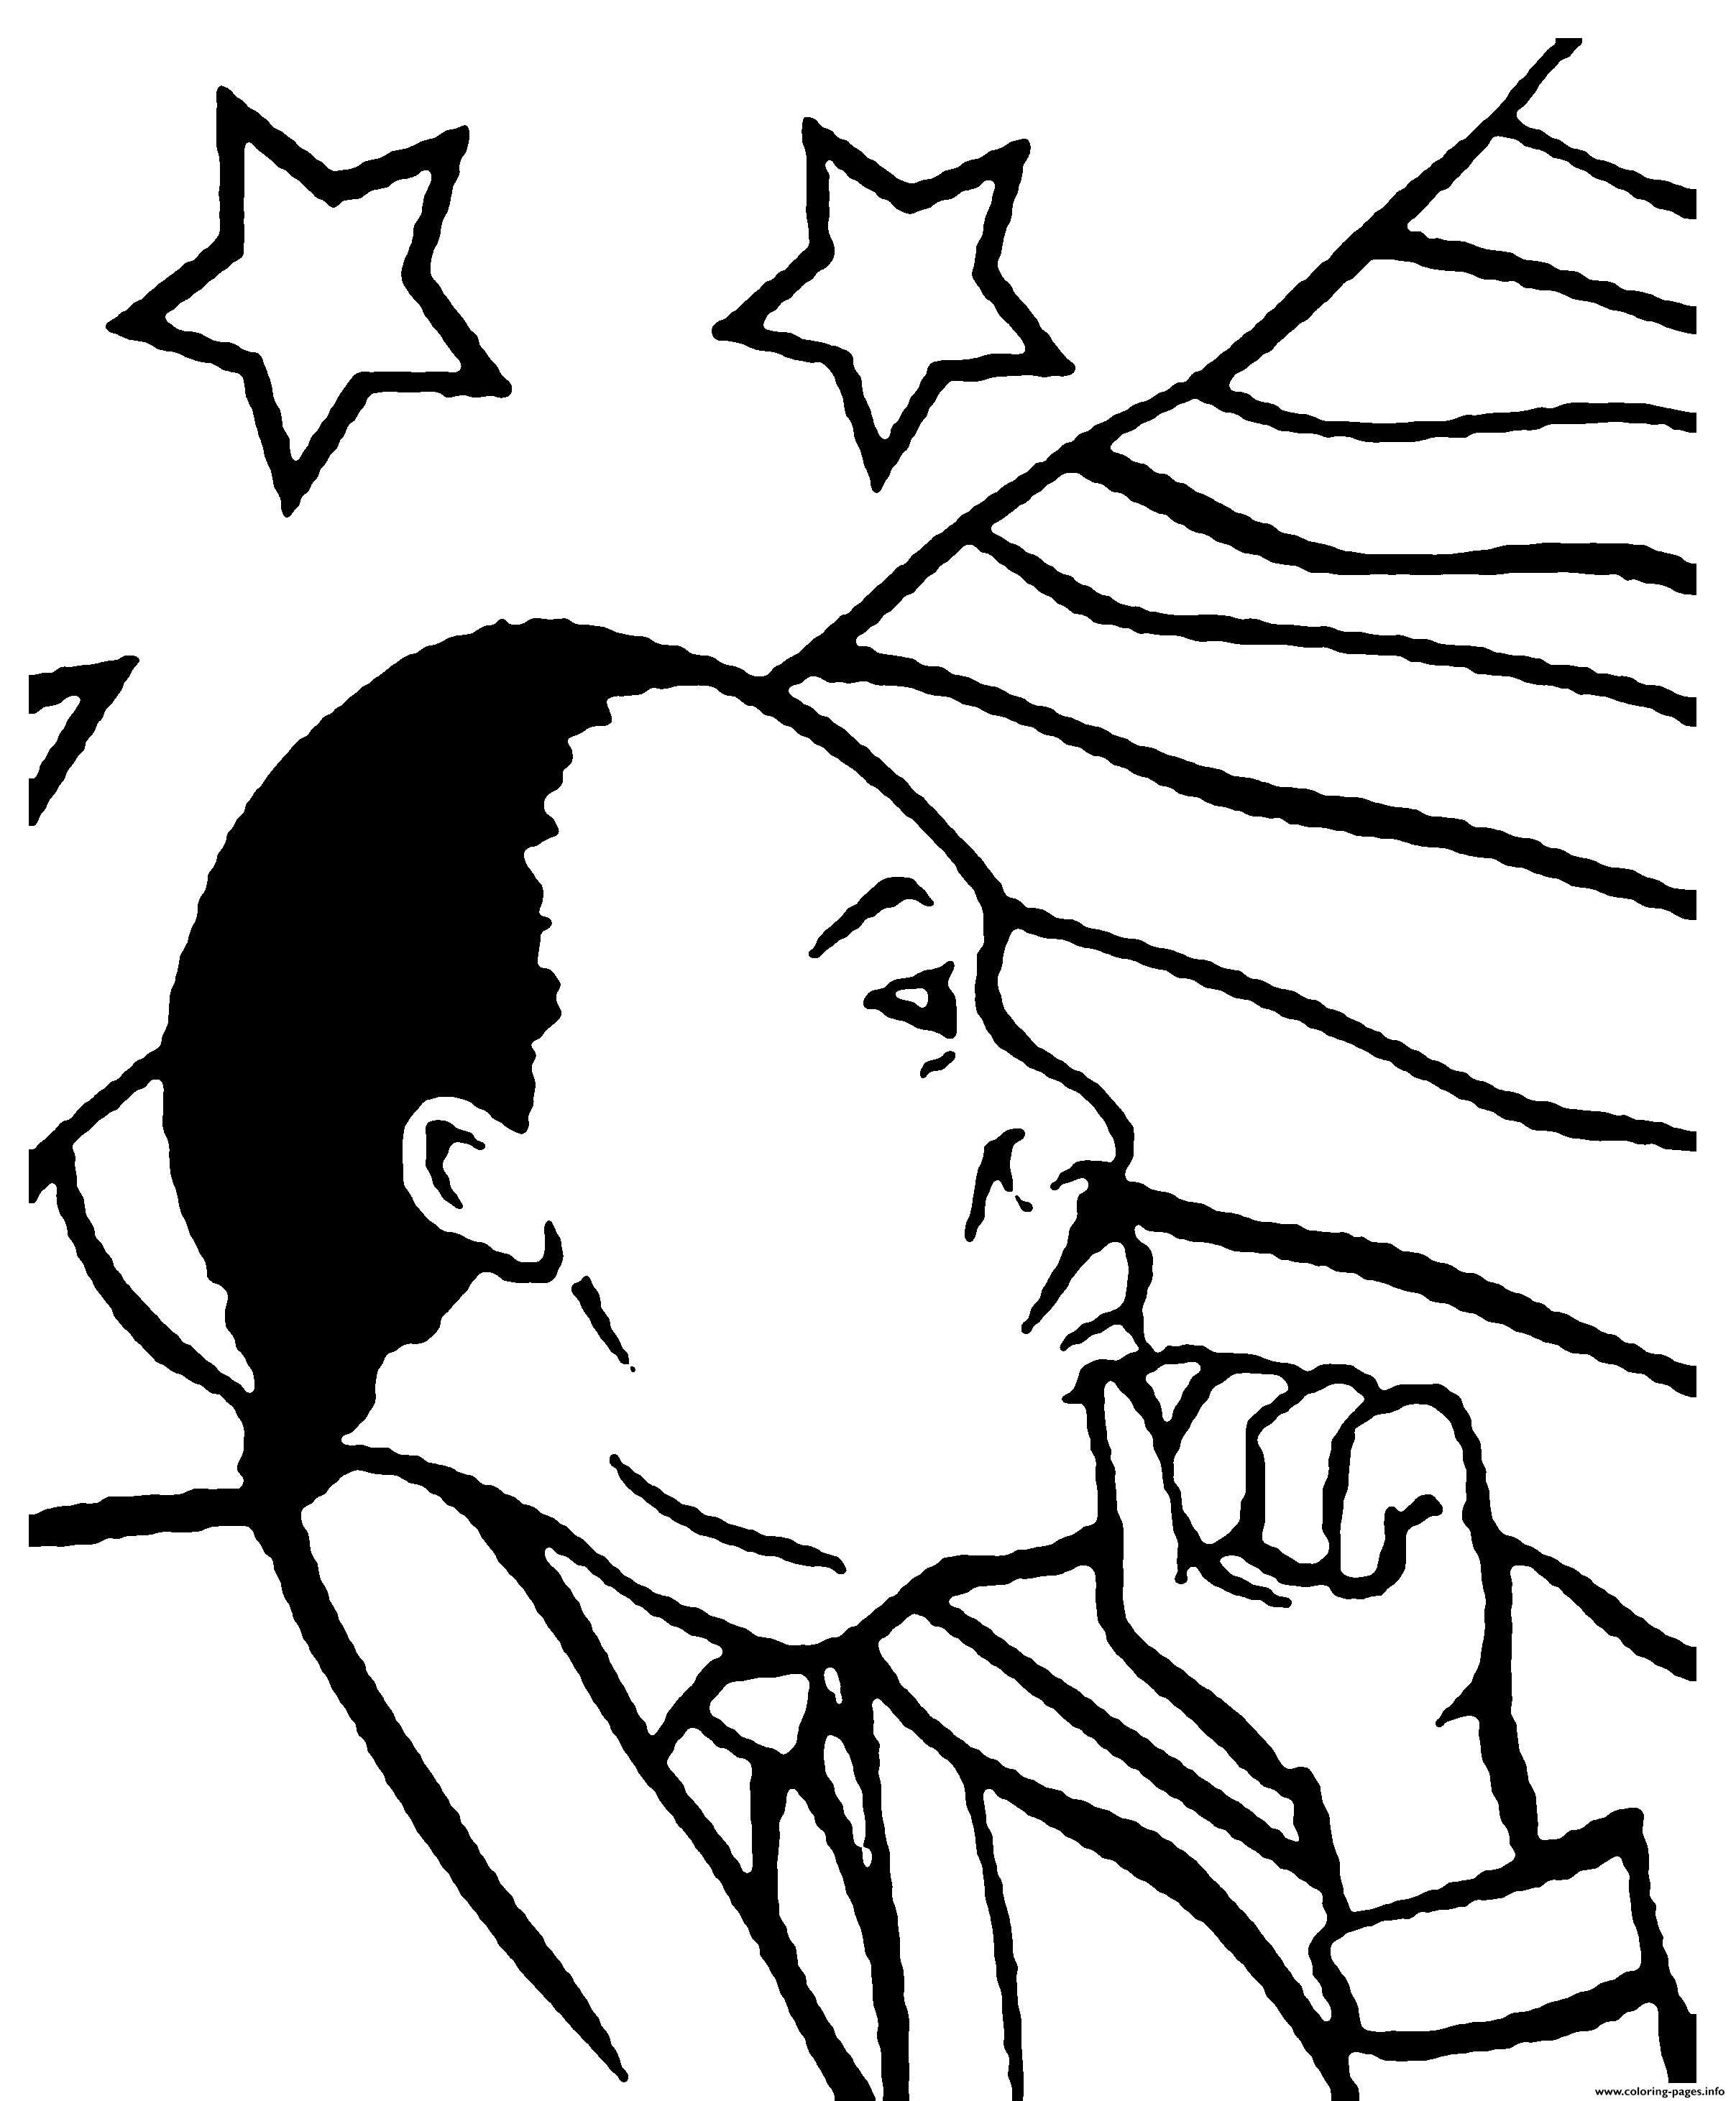 Black History Martin Luther King Day coloring